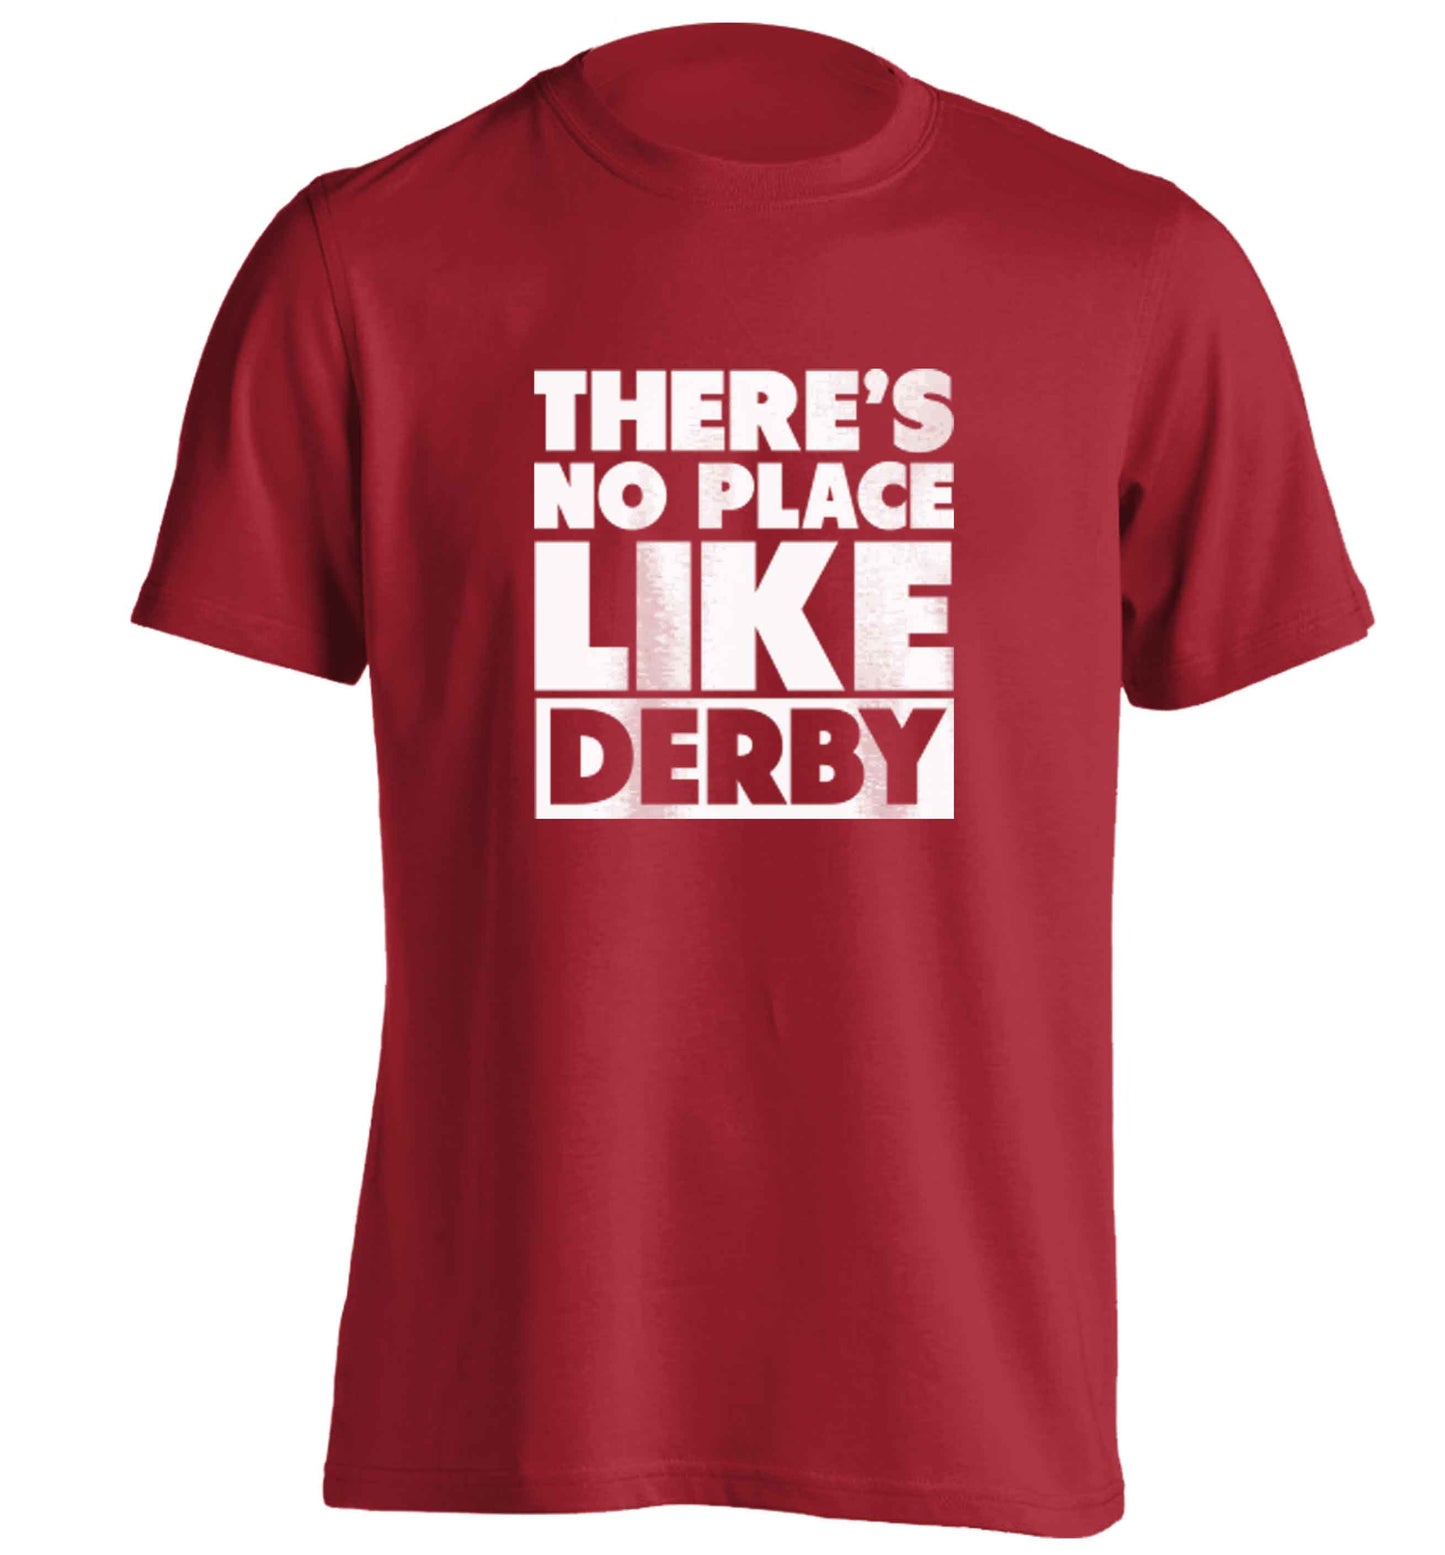 There's no place like Derby adults unisex red Tshirt 2XL